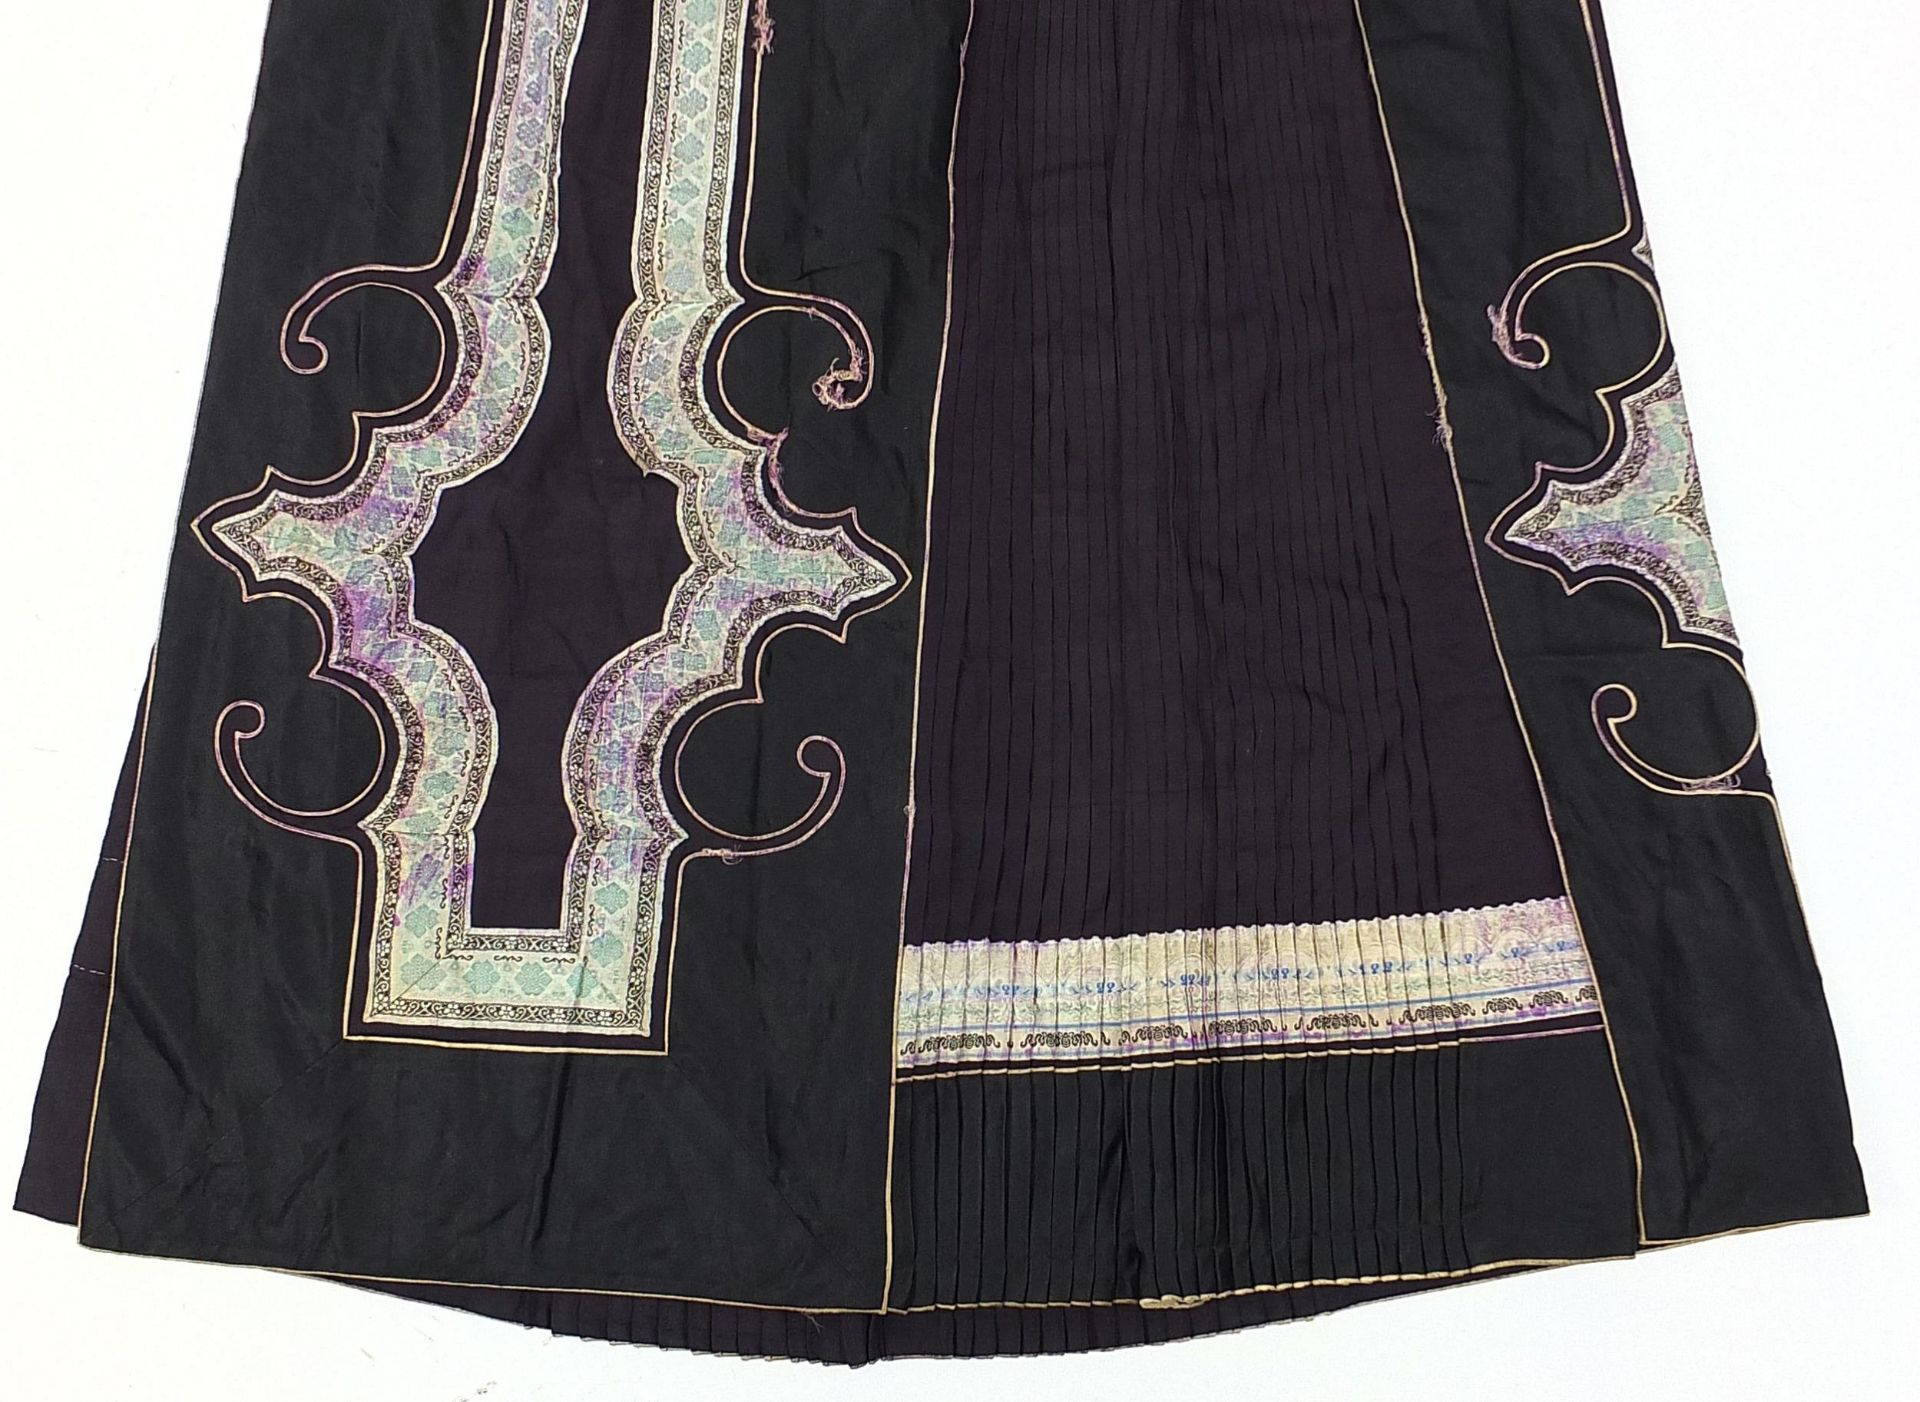 Chinese silk embroidered skirt with floral motifs, 98cm high - Image 3 of 9